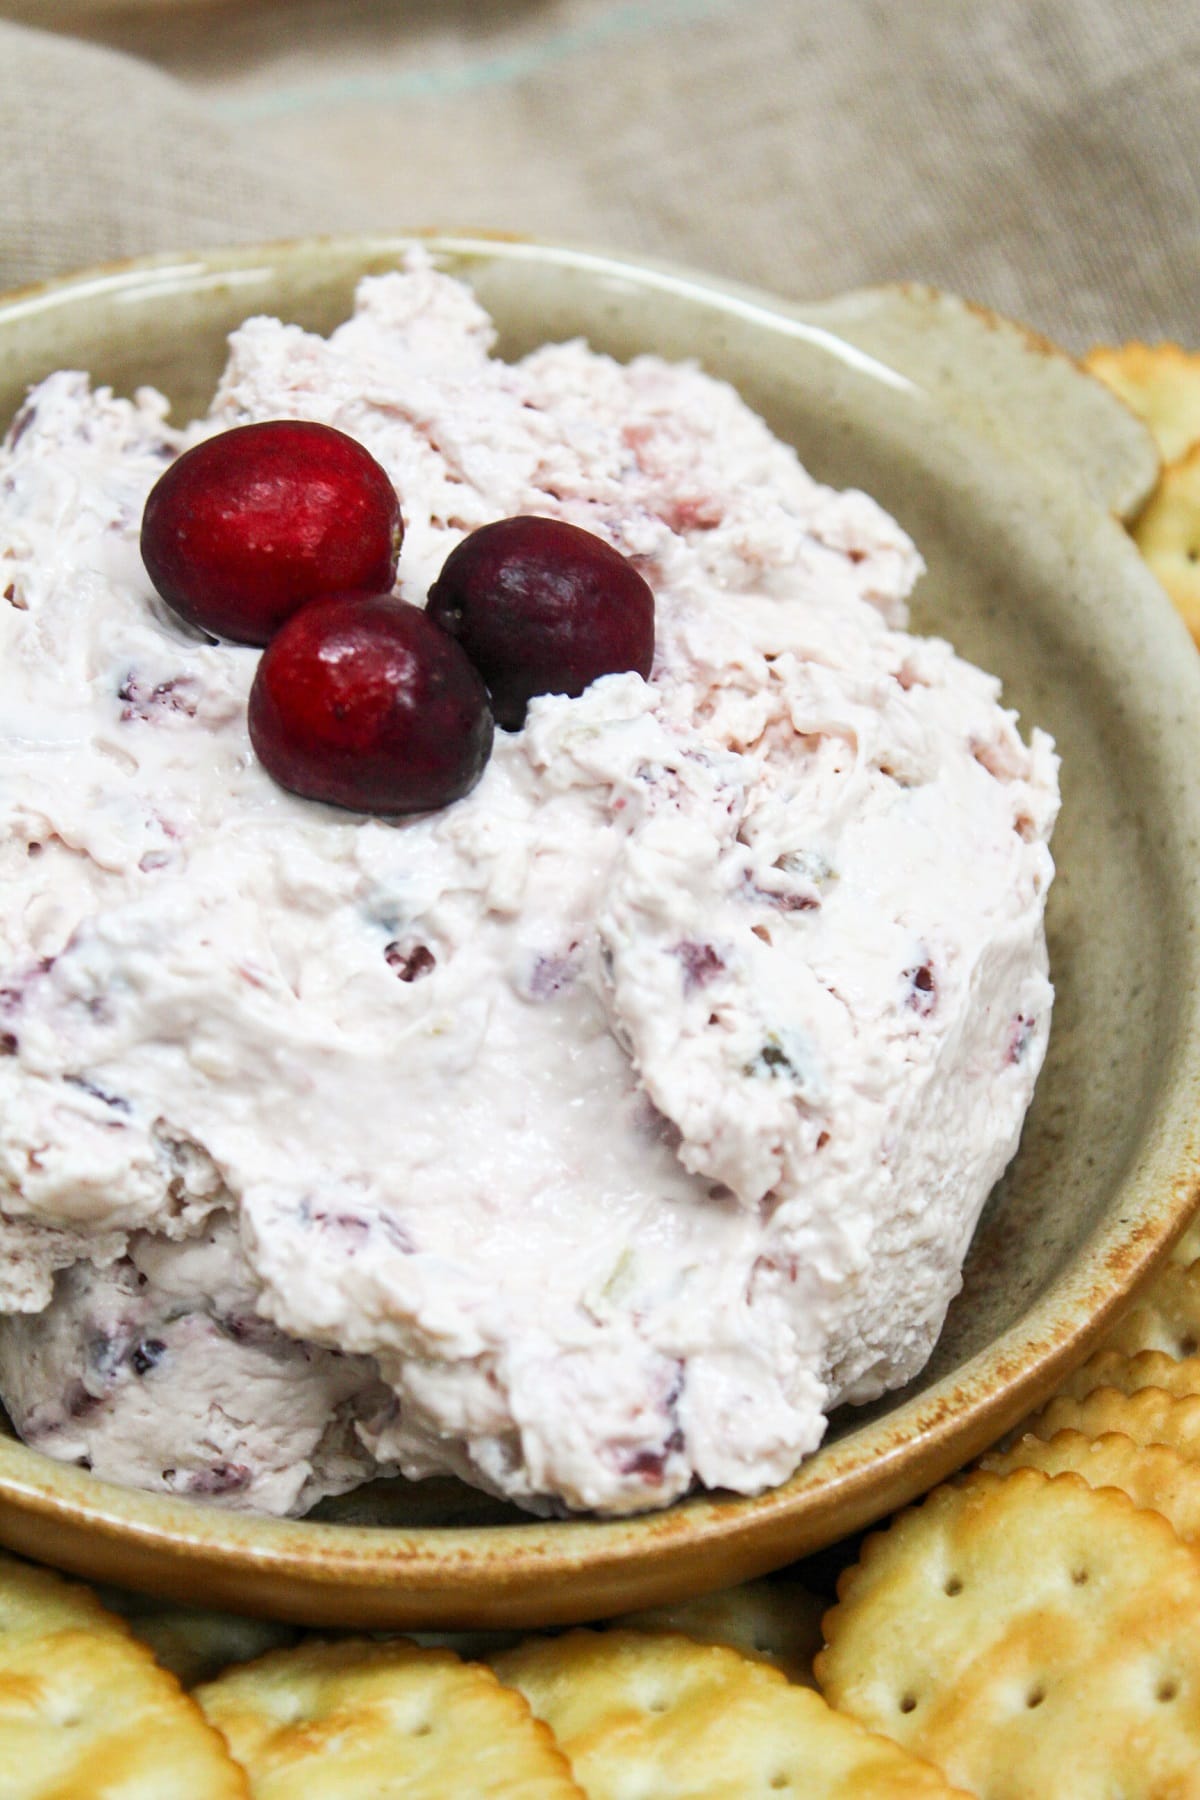 pink cranberry jalapeno dip topped with fresh cranberries on a bowl. Crackers are served on the side of the bowl.